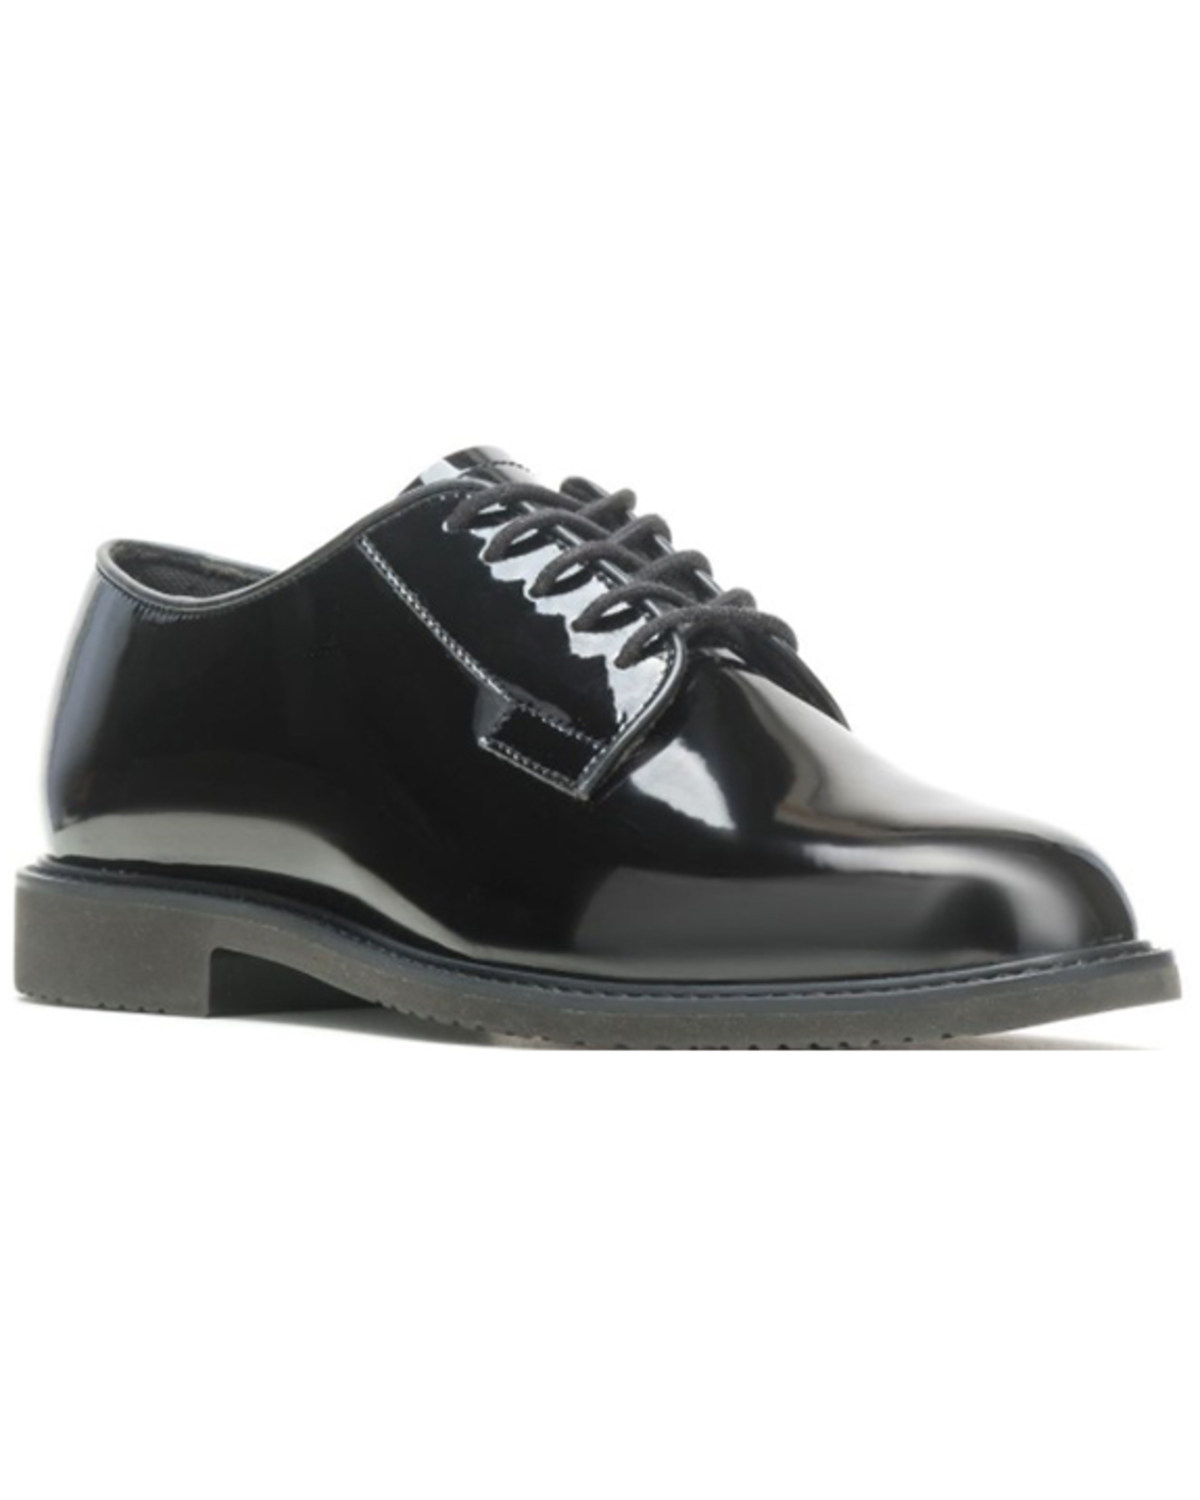 Bates Men's Sentry High Gloss Lace-Up Work Oxford Shoes - Round Toe